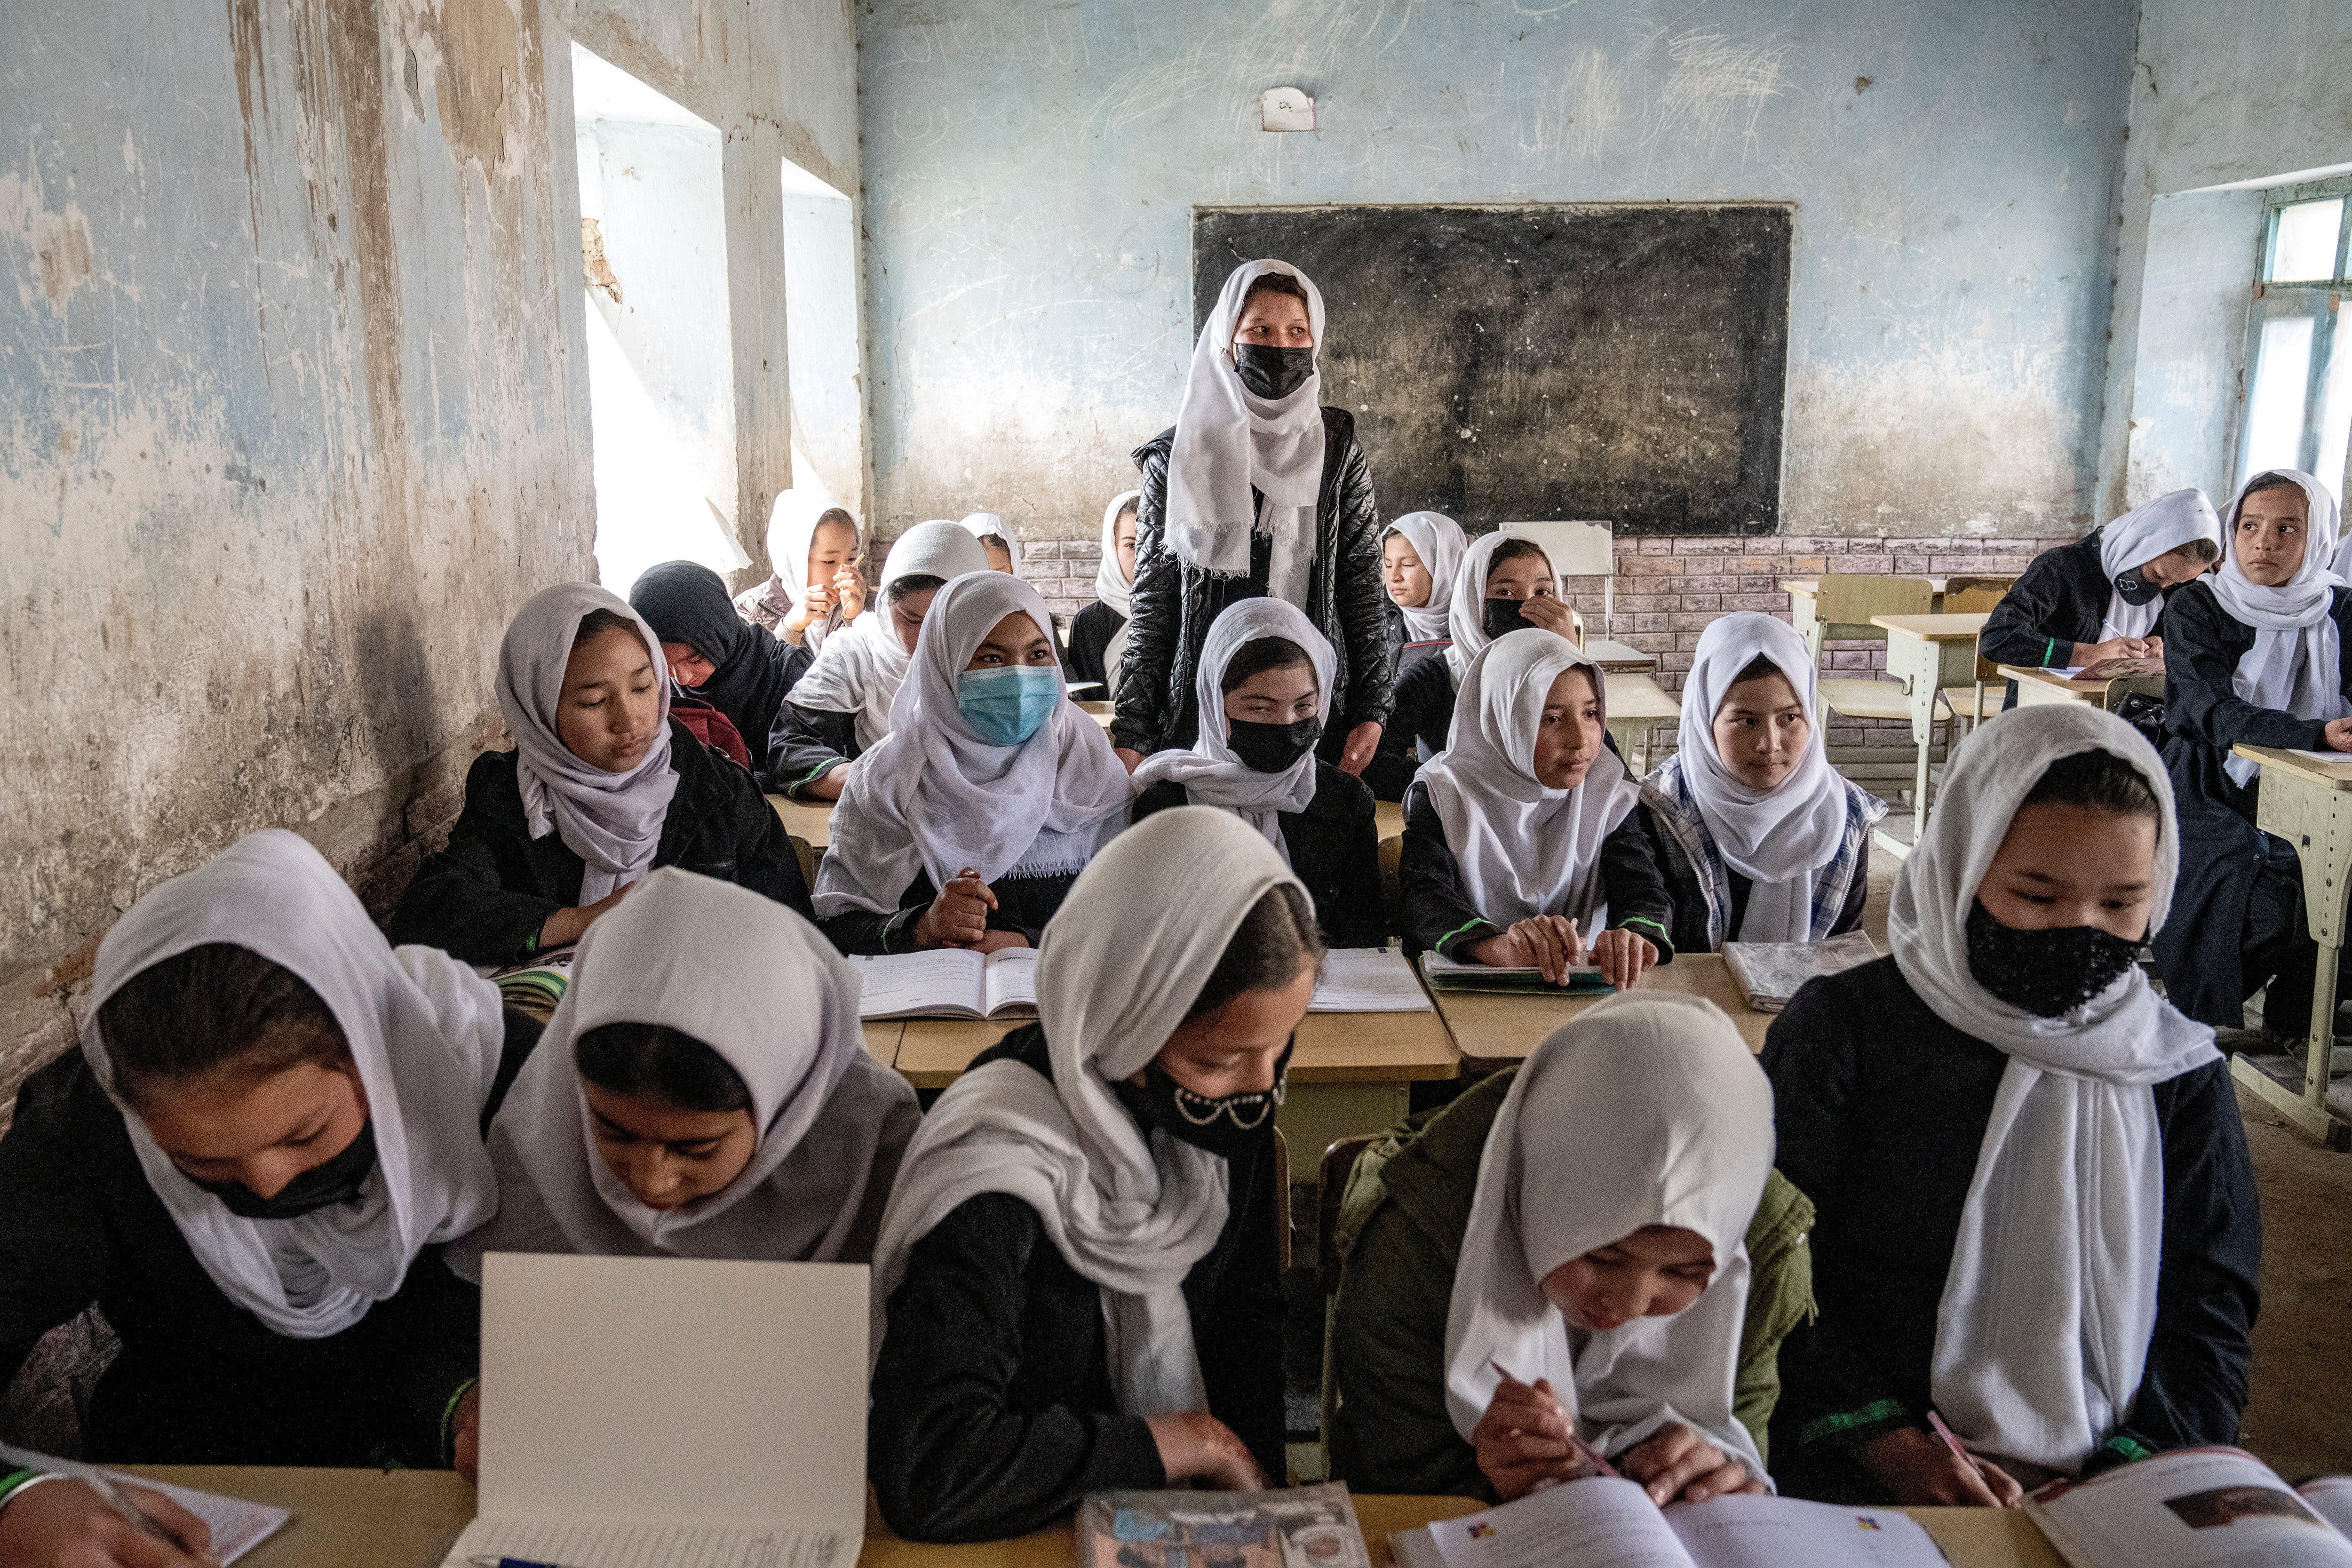 Apaganistan Tichar Sudent Sex - Afghan religious scholars criticize girls' education ban | The Independent